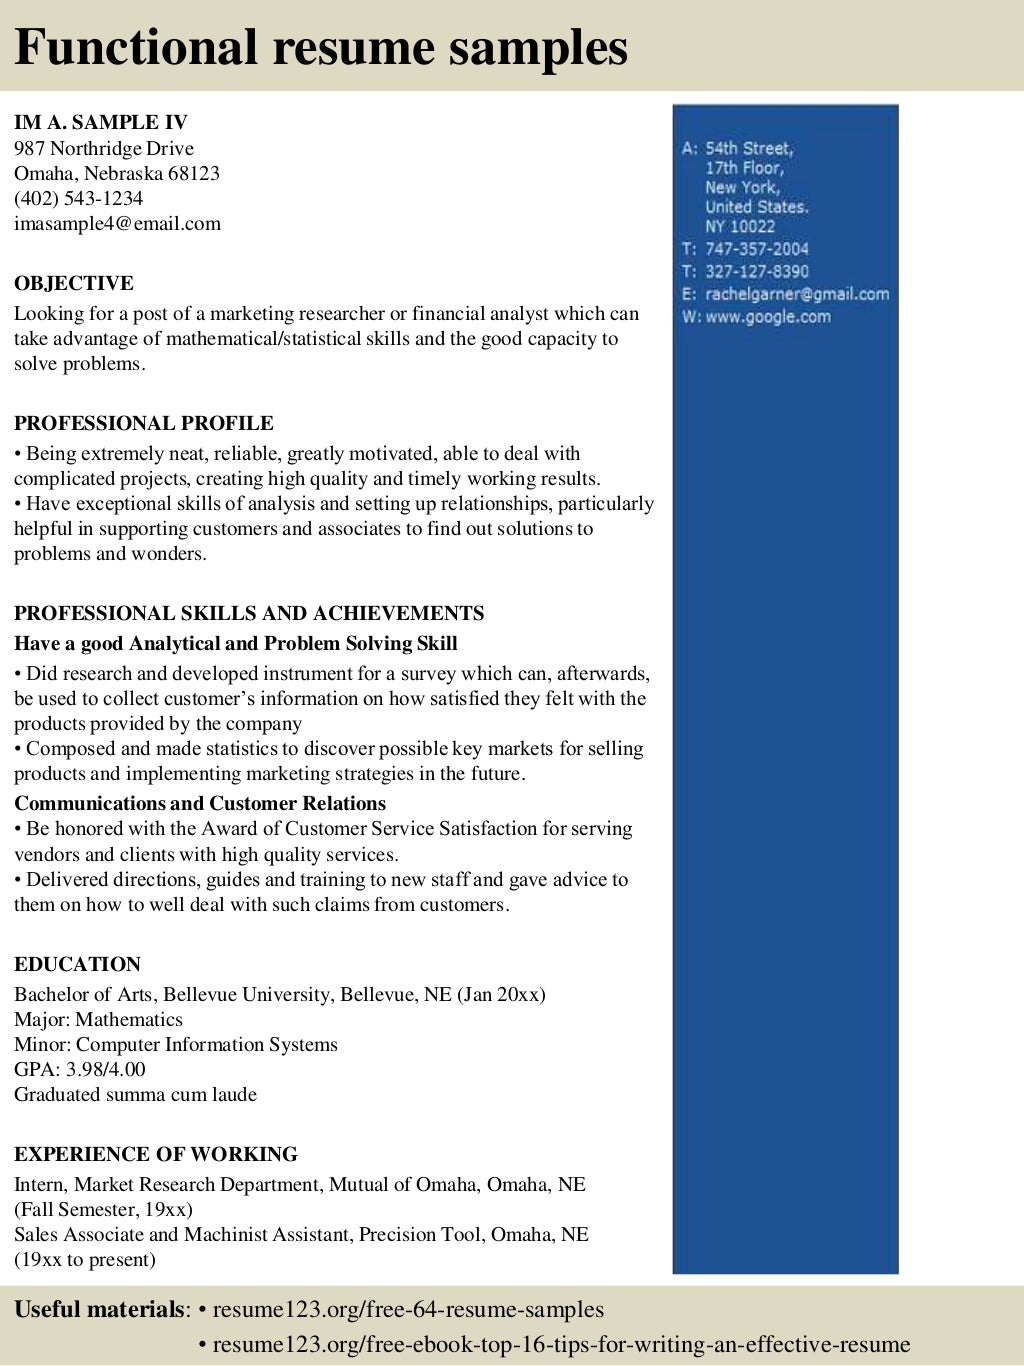 sample resume objectives for pharmacy assistant